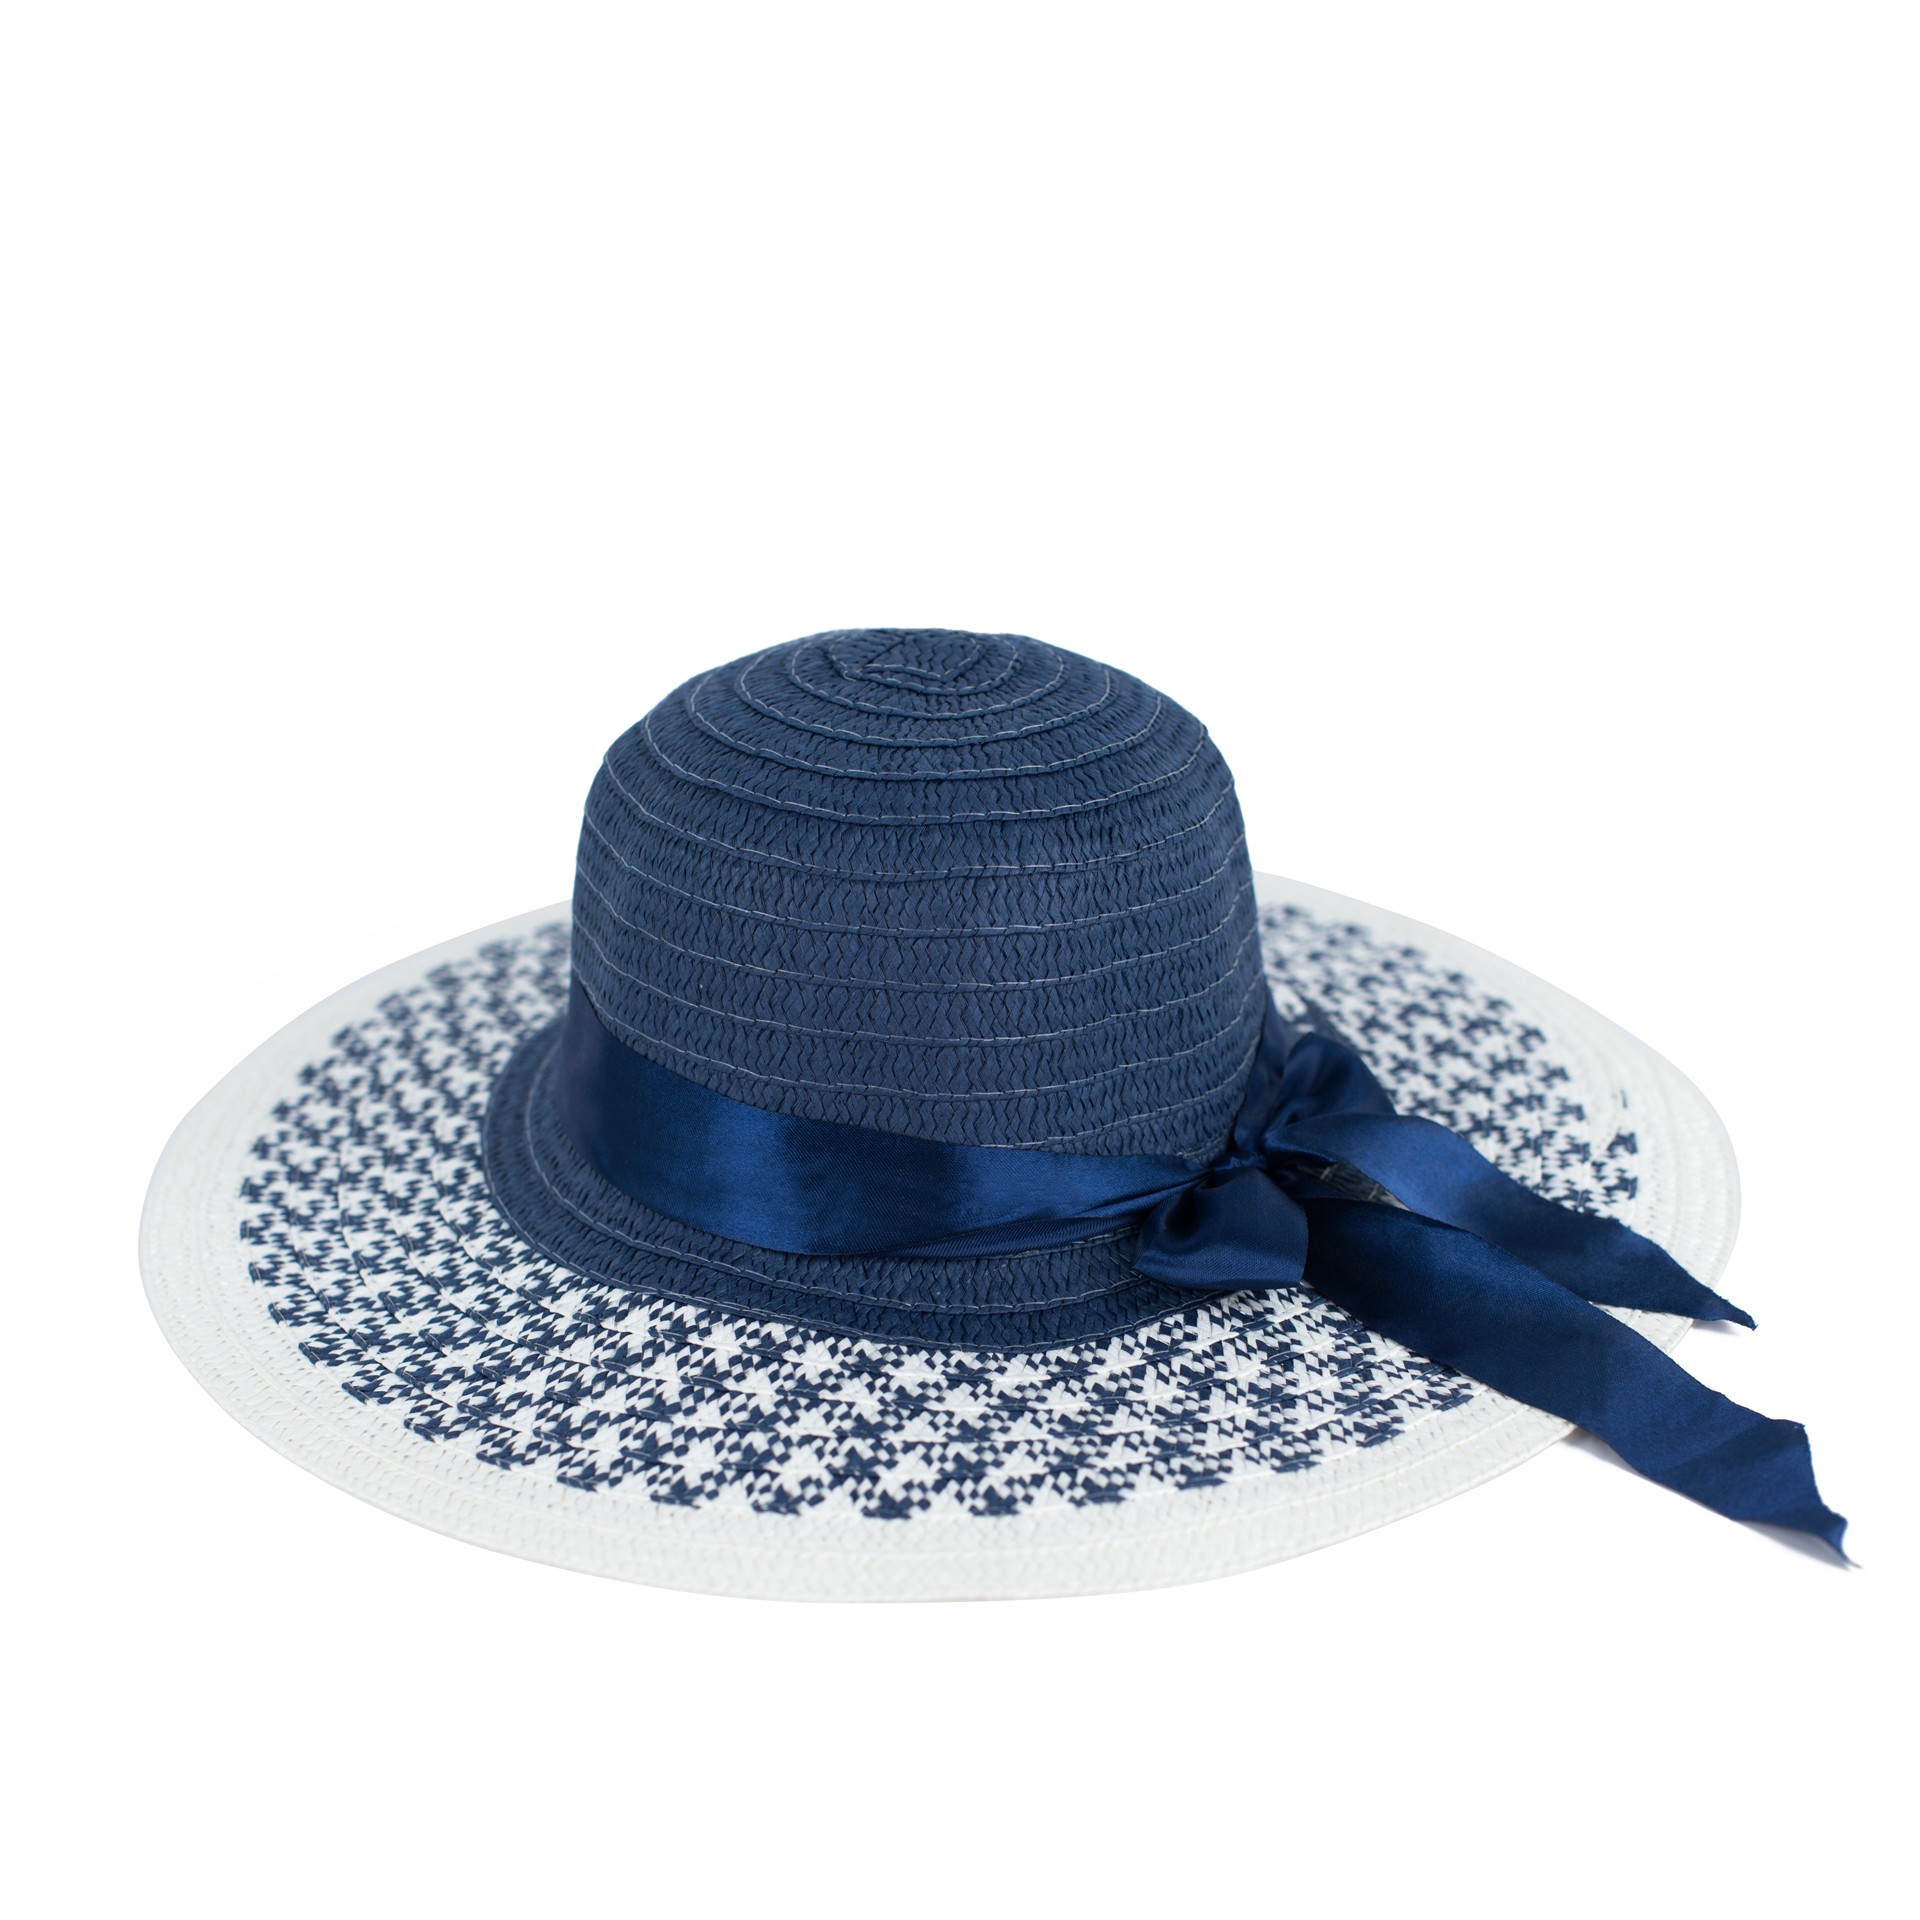 Art Of Polo Woman's Hat cz22120 Navy Blue